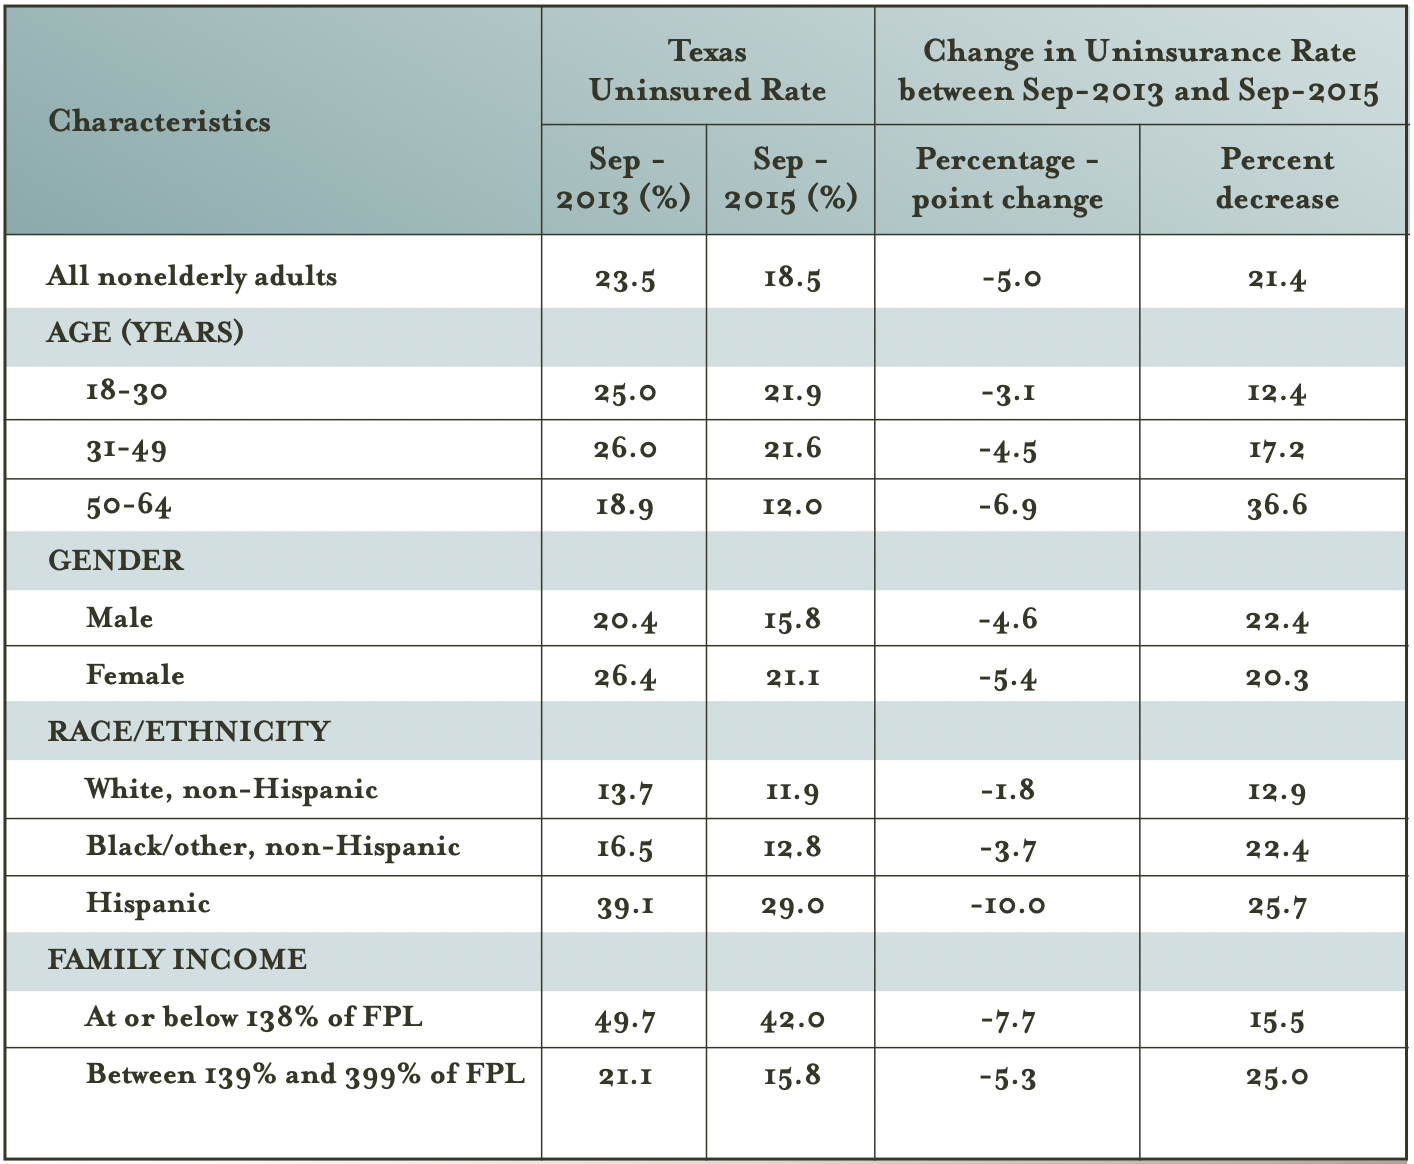 This table compares uninsured rates by demographics for Texas adults over time.